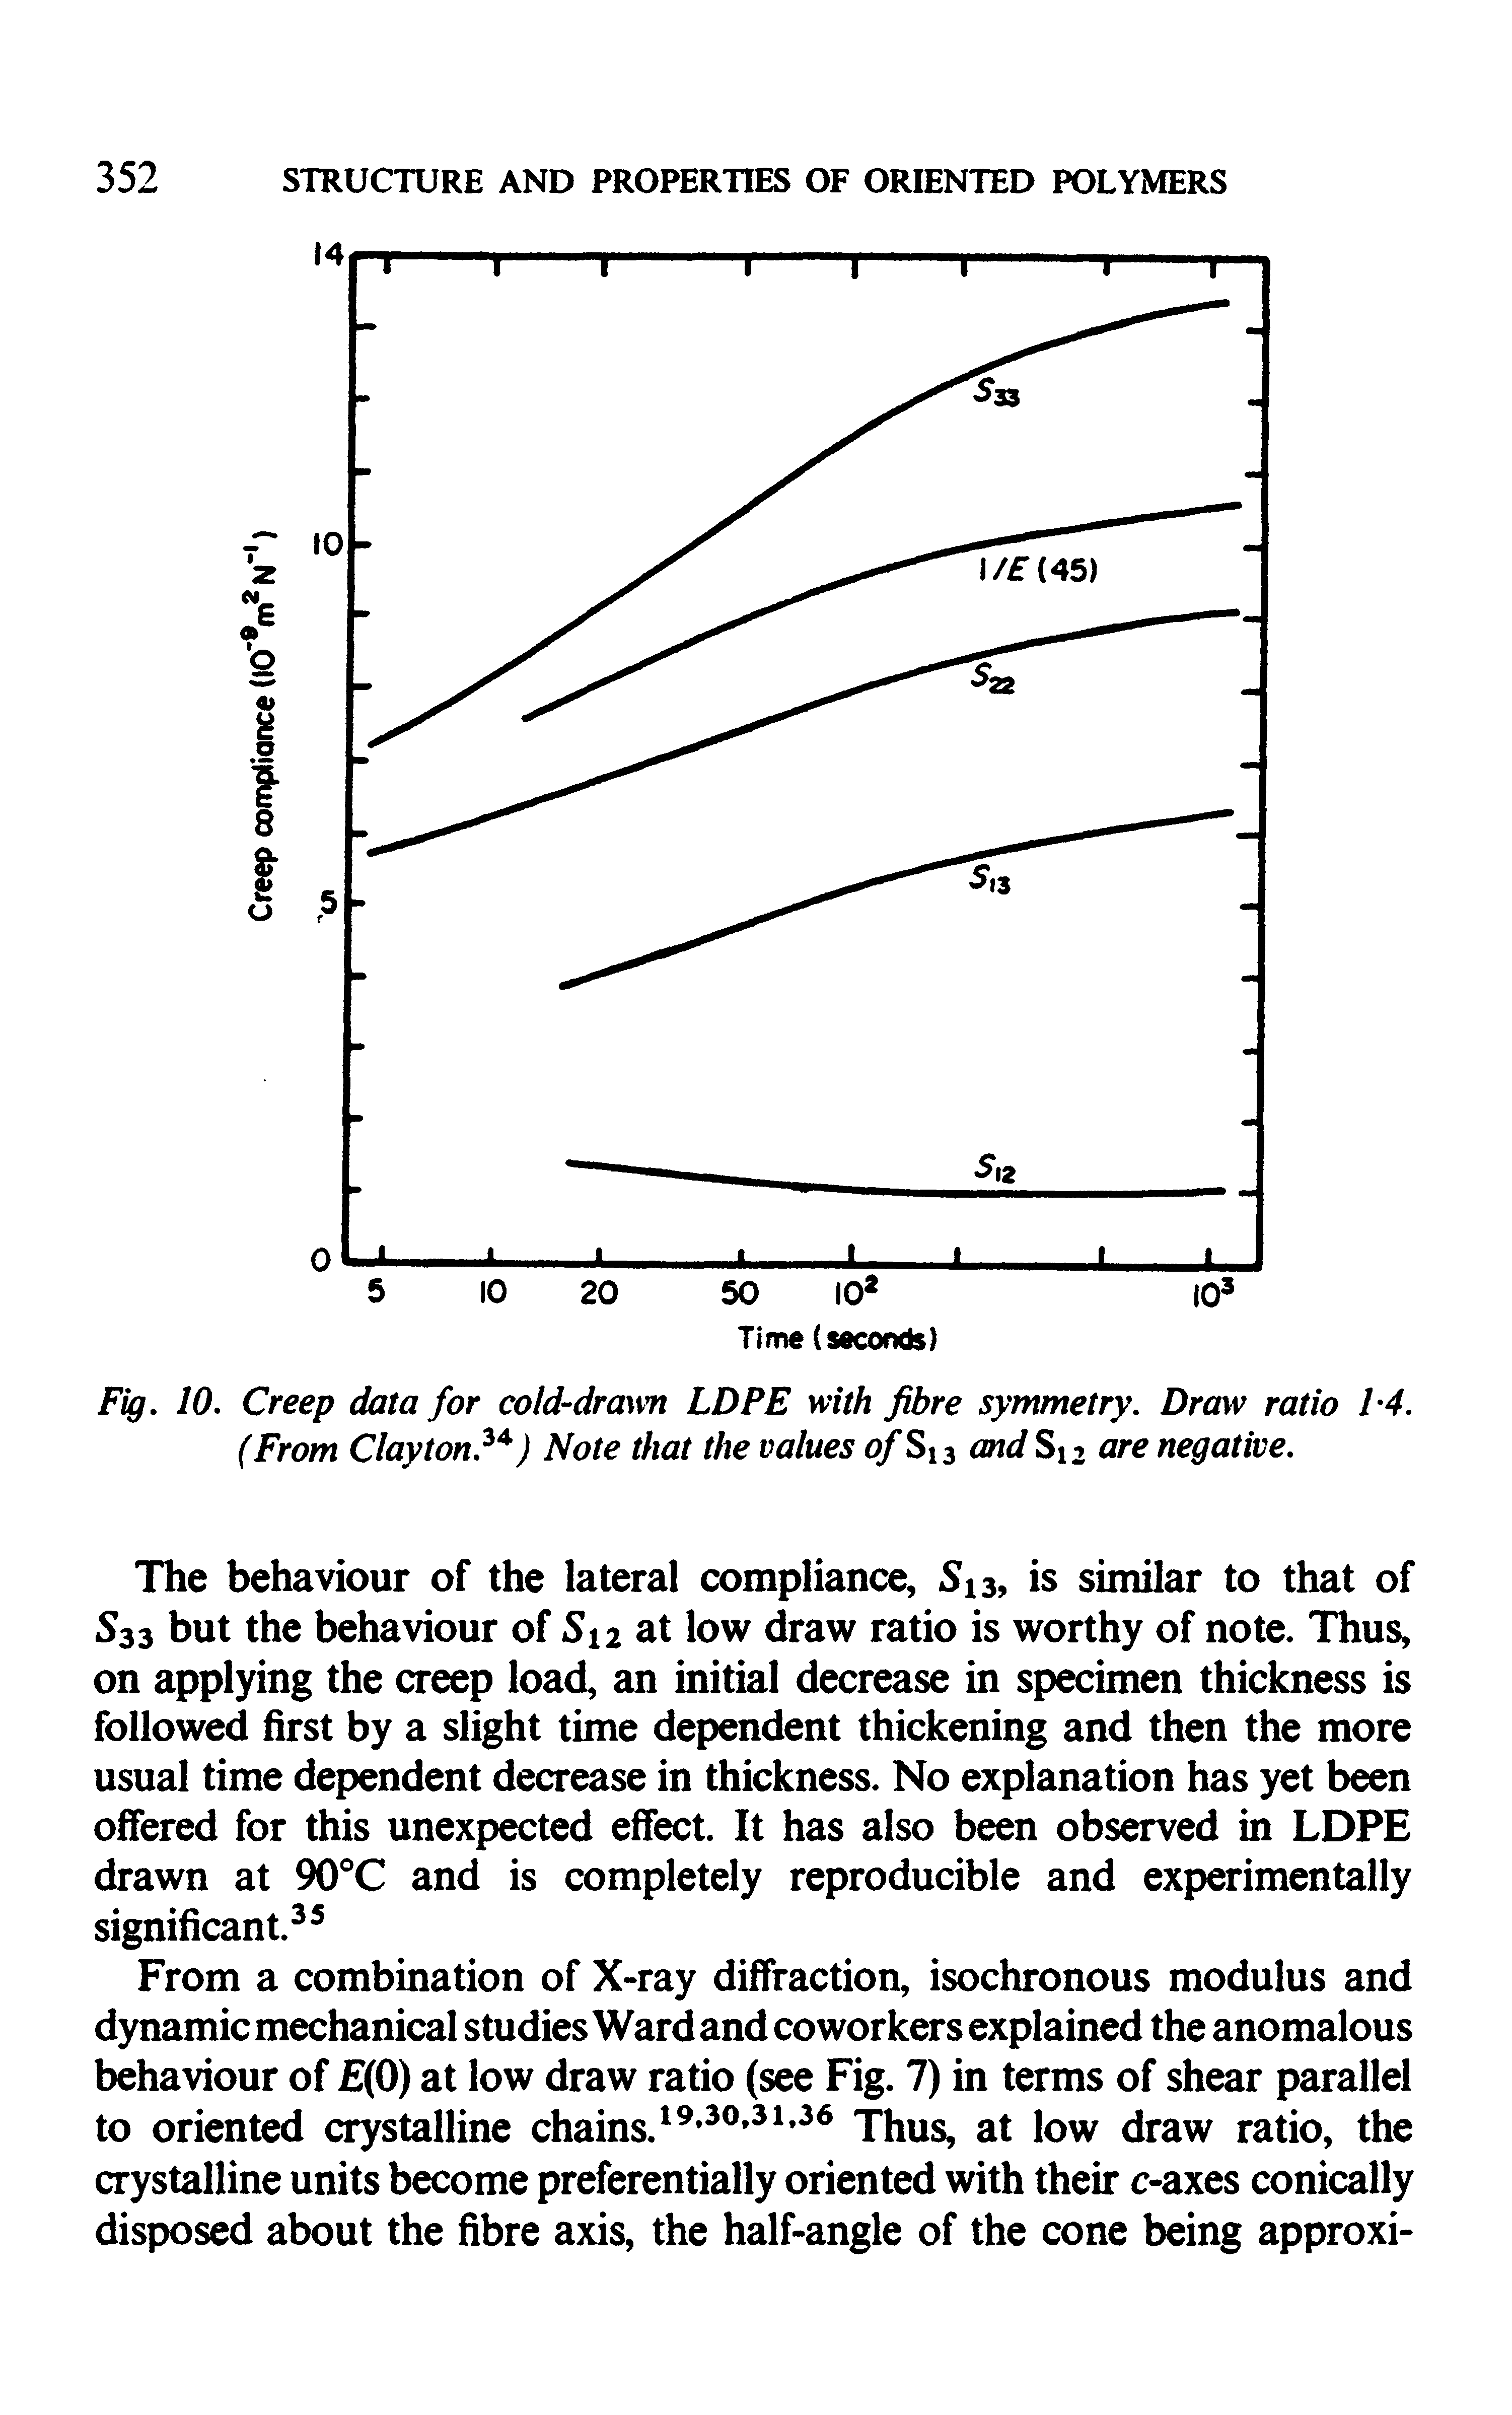 Fig. 10. Creep data for cold-drawn LDPE with fibre symmetry. Draw ratio 1-4. (From Clayton. ) Note that the values of St 3 and Si 2 are negative.